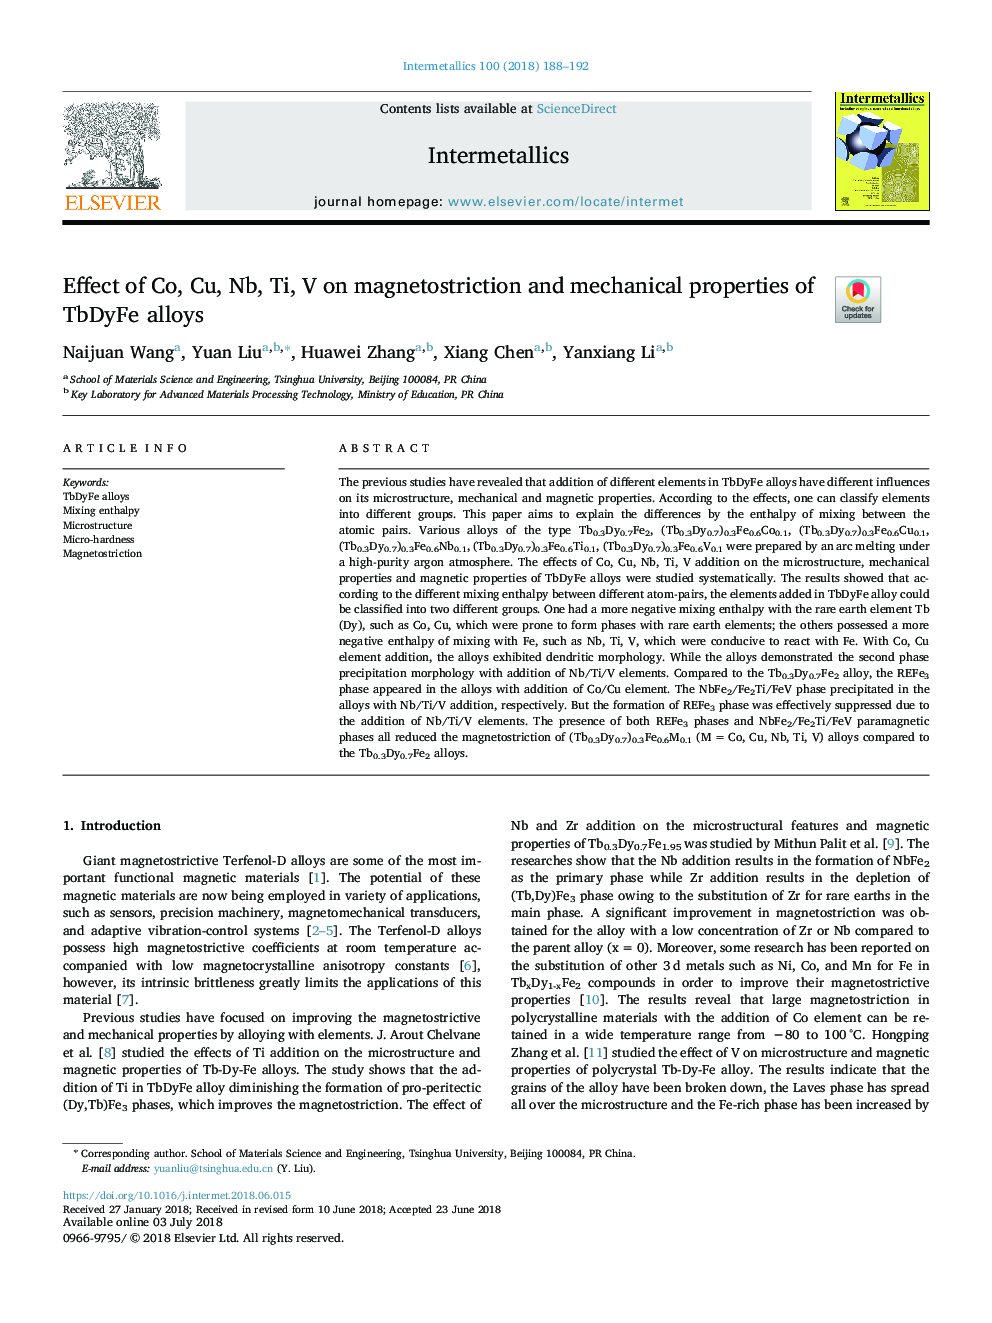 Effect of Co, Cu, Nb, Ti, V on magnetostriction and mechanical properties of TbDyFe alloys